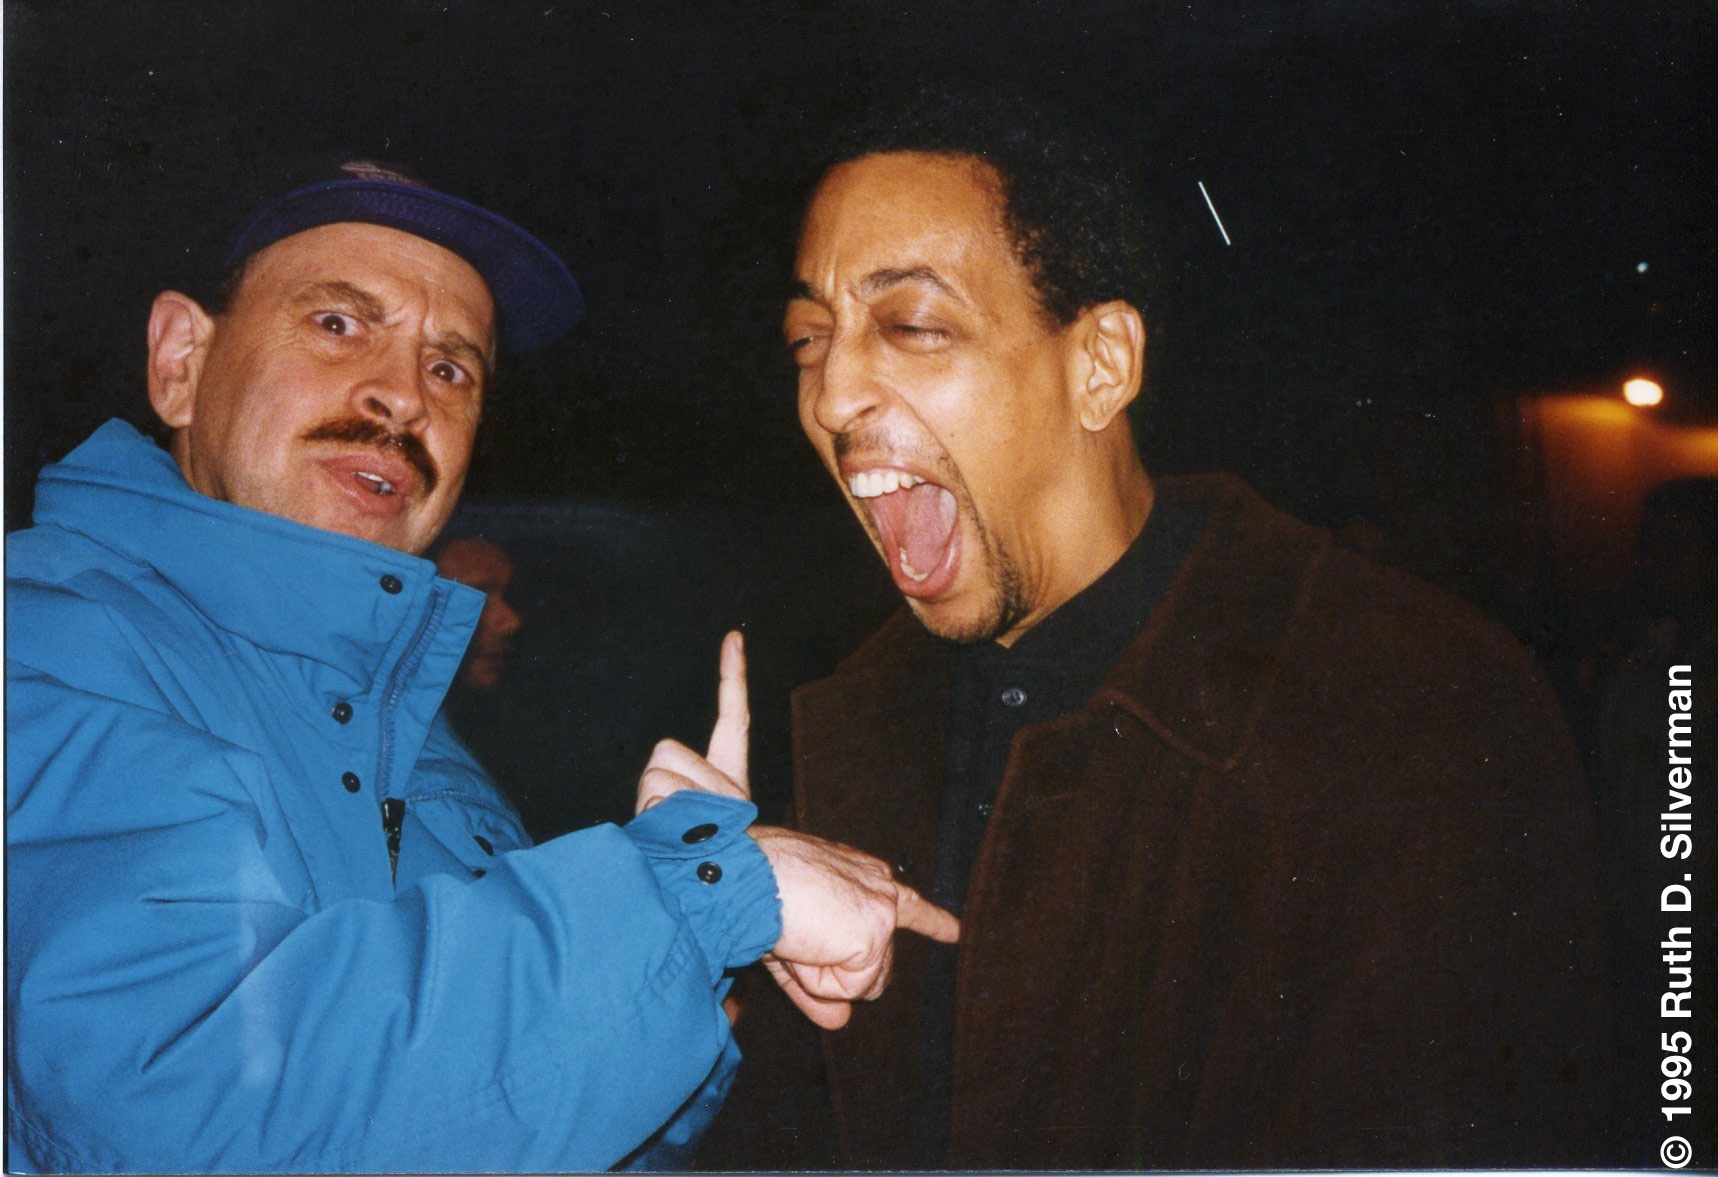 The late, great Gregory Hines was a huge bodybuilding fan. With my colleague Lonnie Teper in ’95.